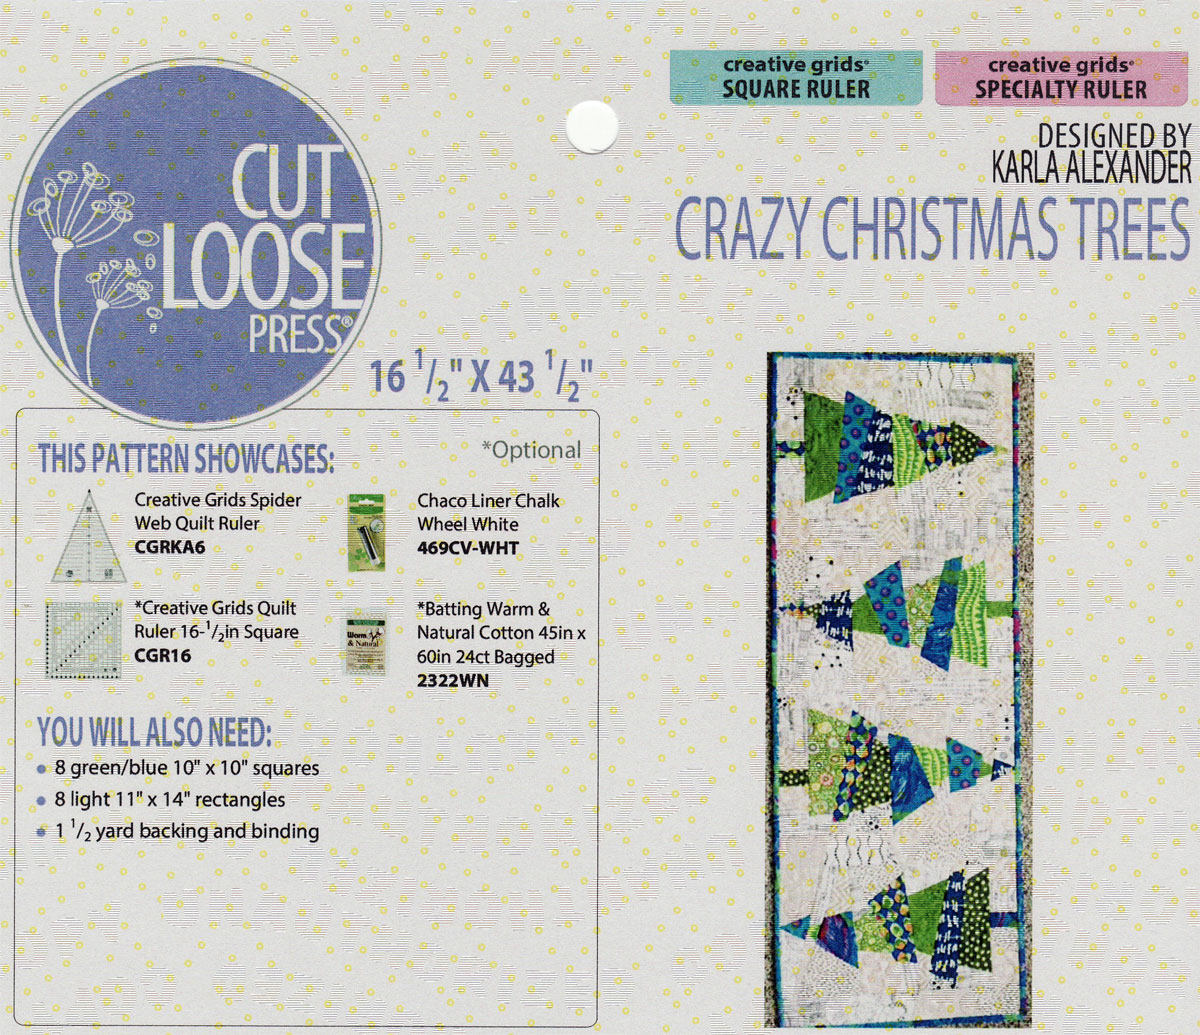 crazy-christmas-trees-sewing-pattern-Cut-Loose-Press-front